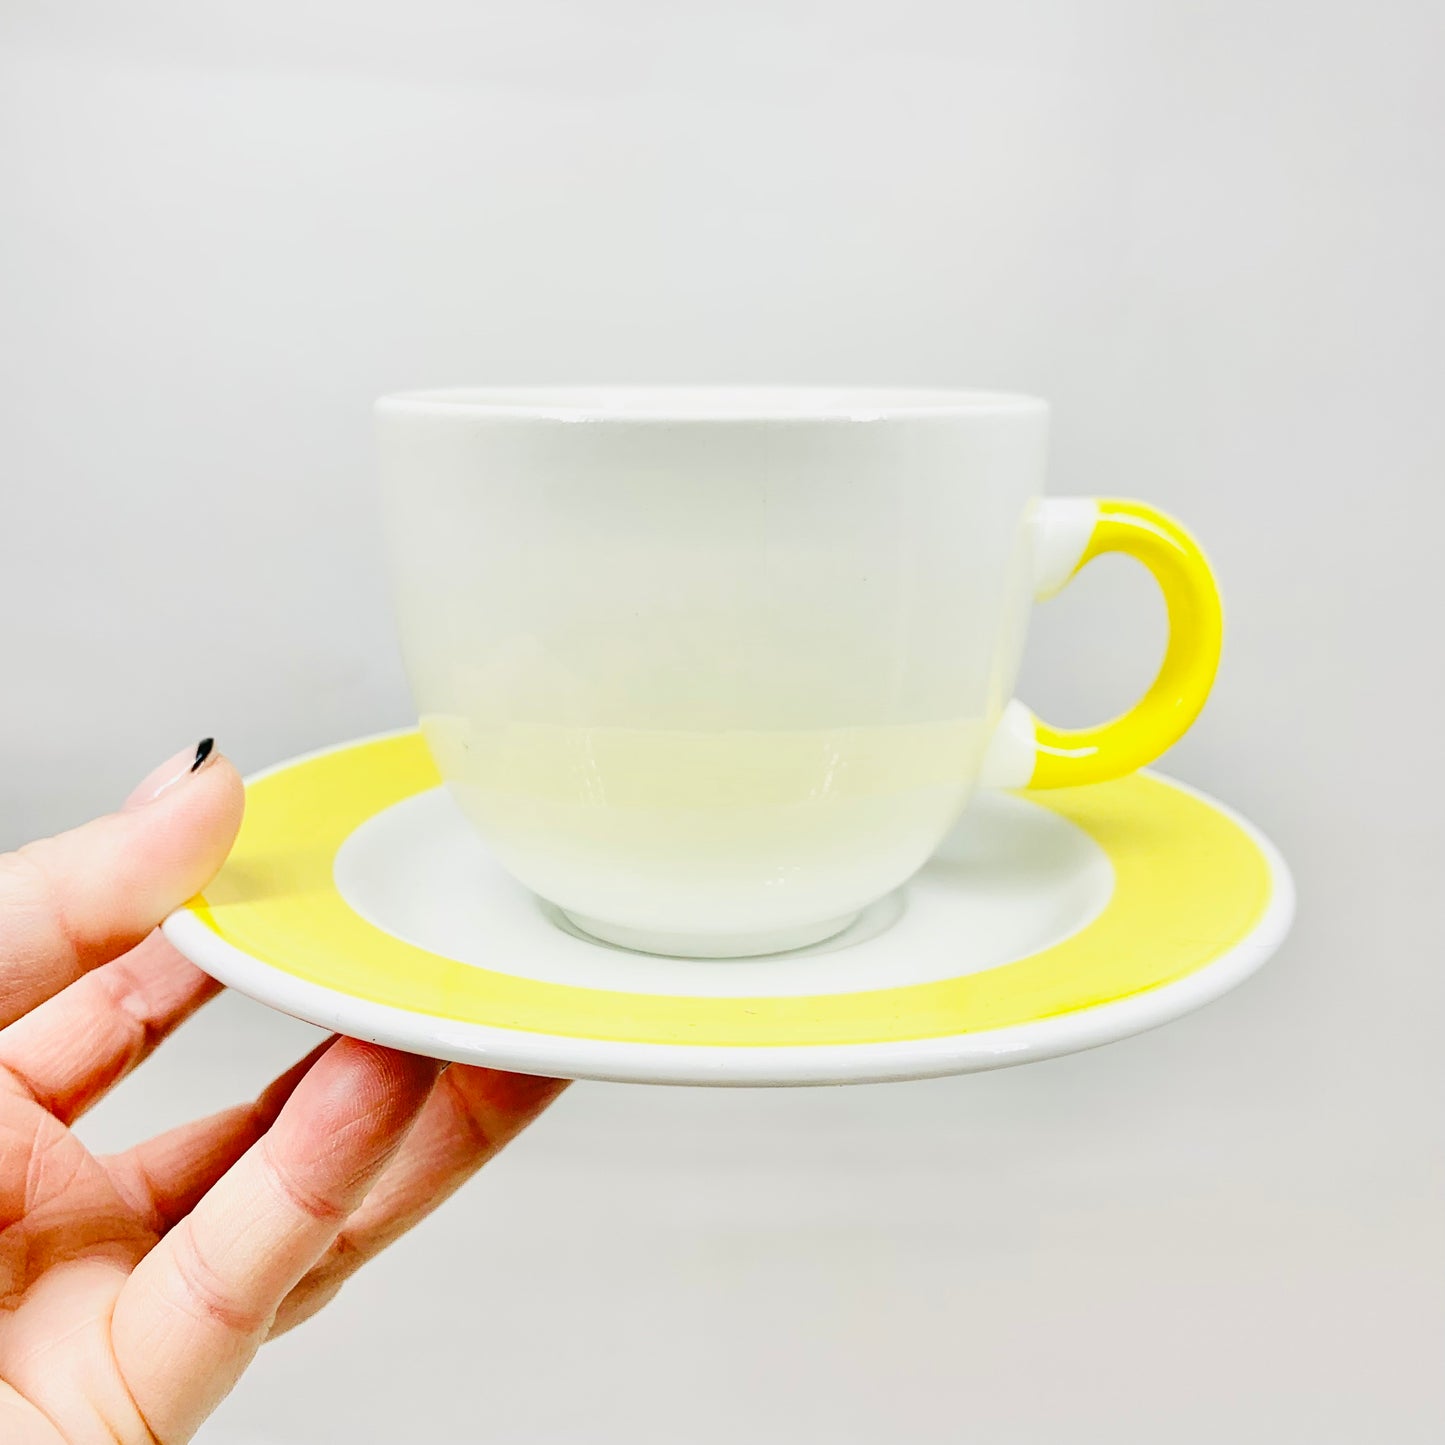 1980s hand painted Italian white porcelain coffee cup and matching saucer with yellow rim